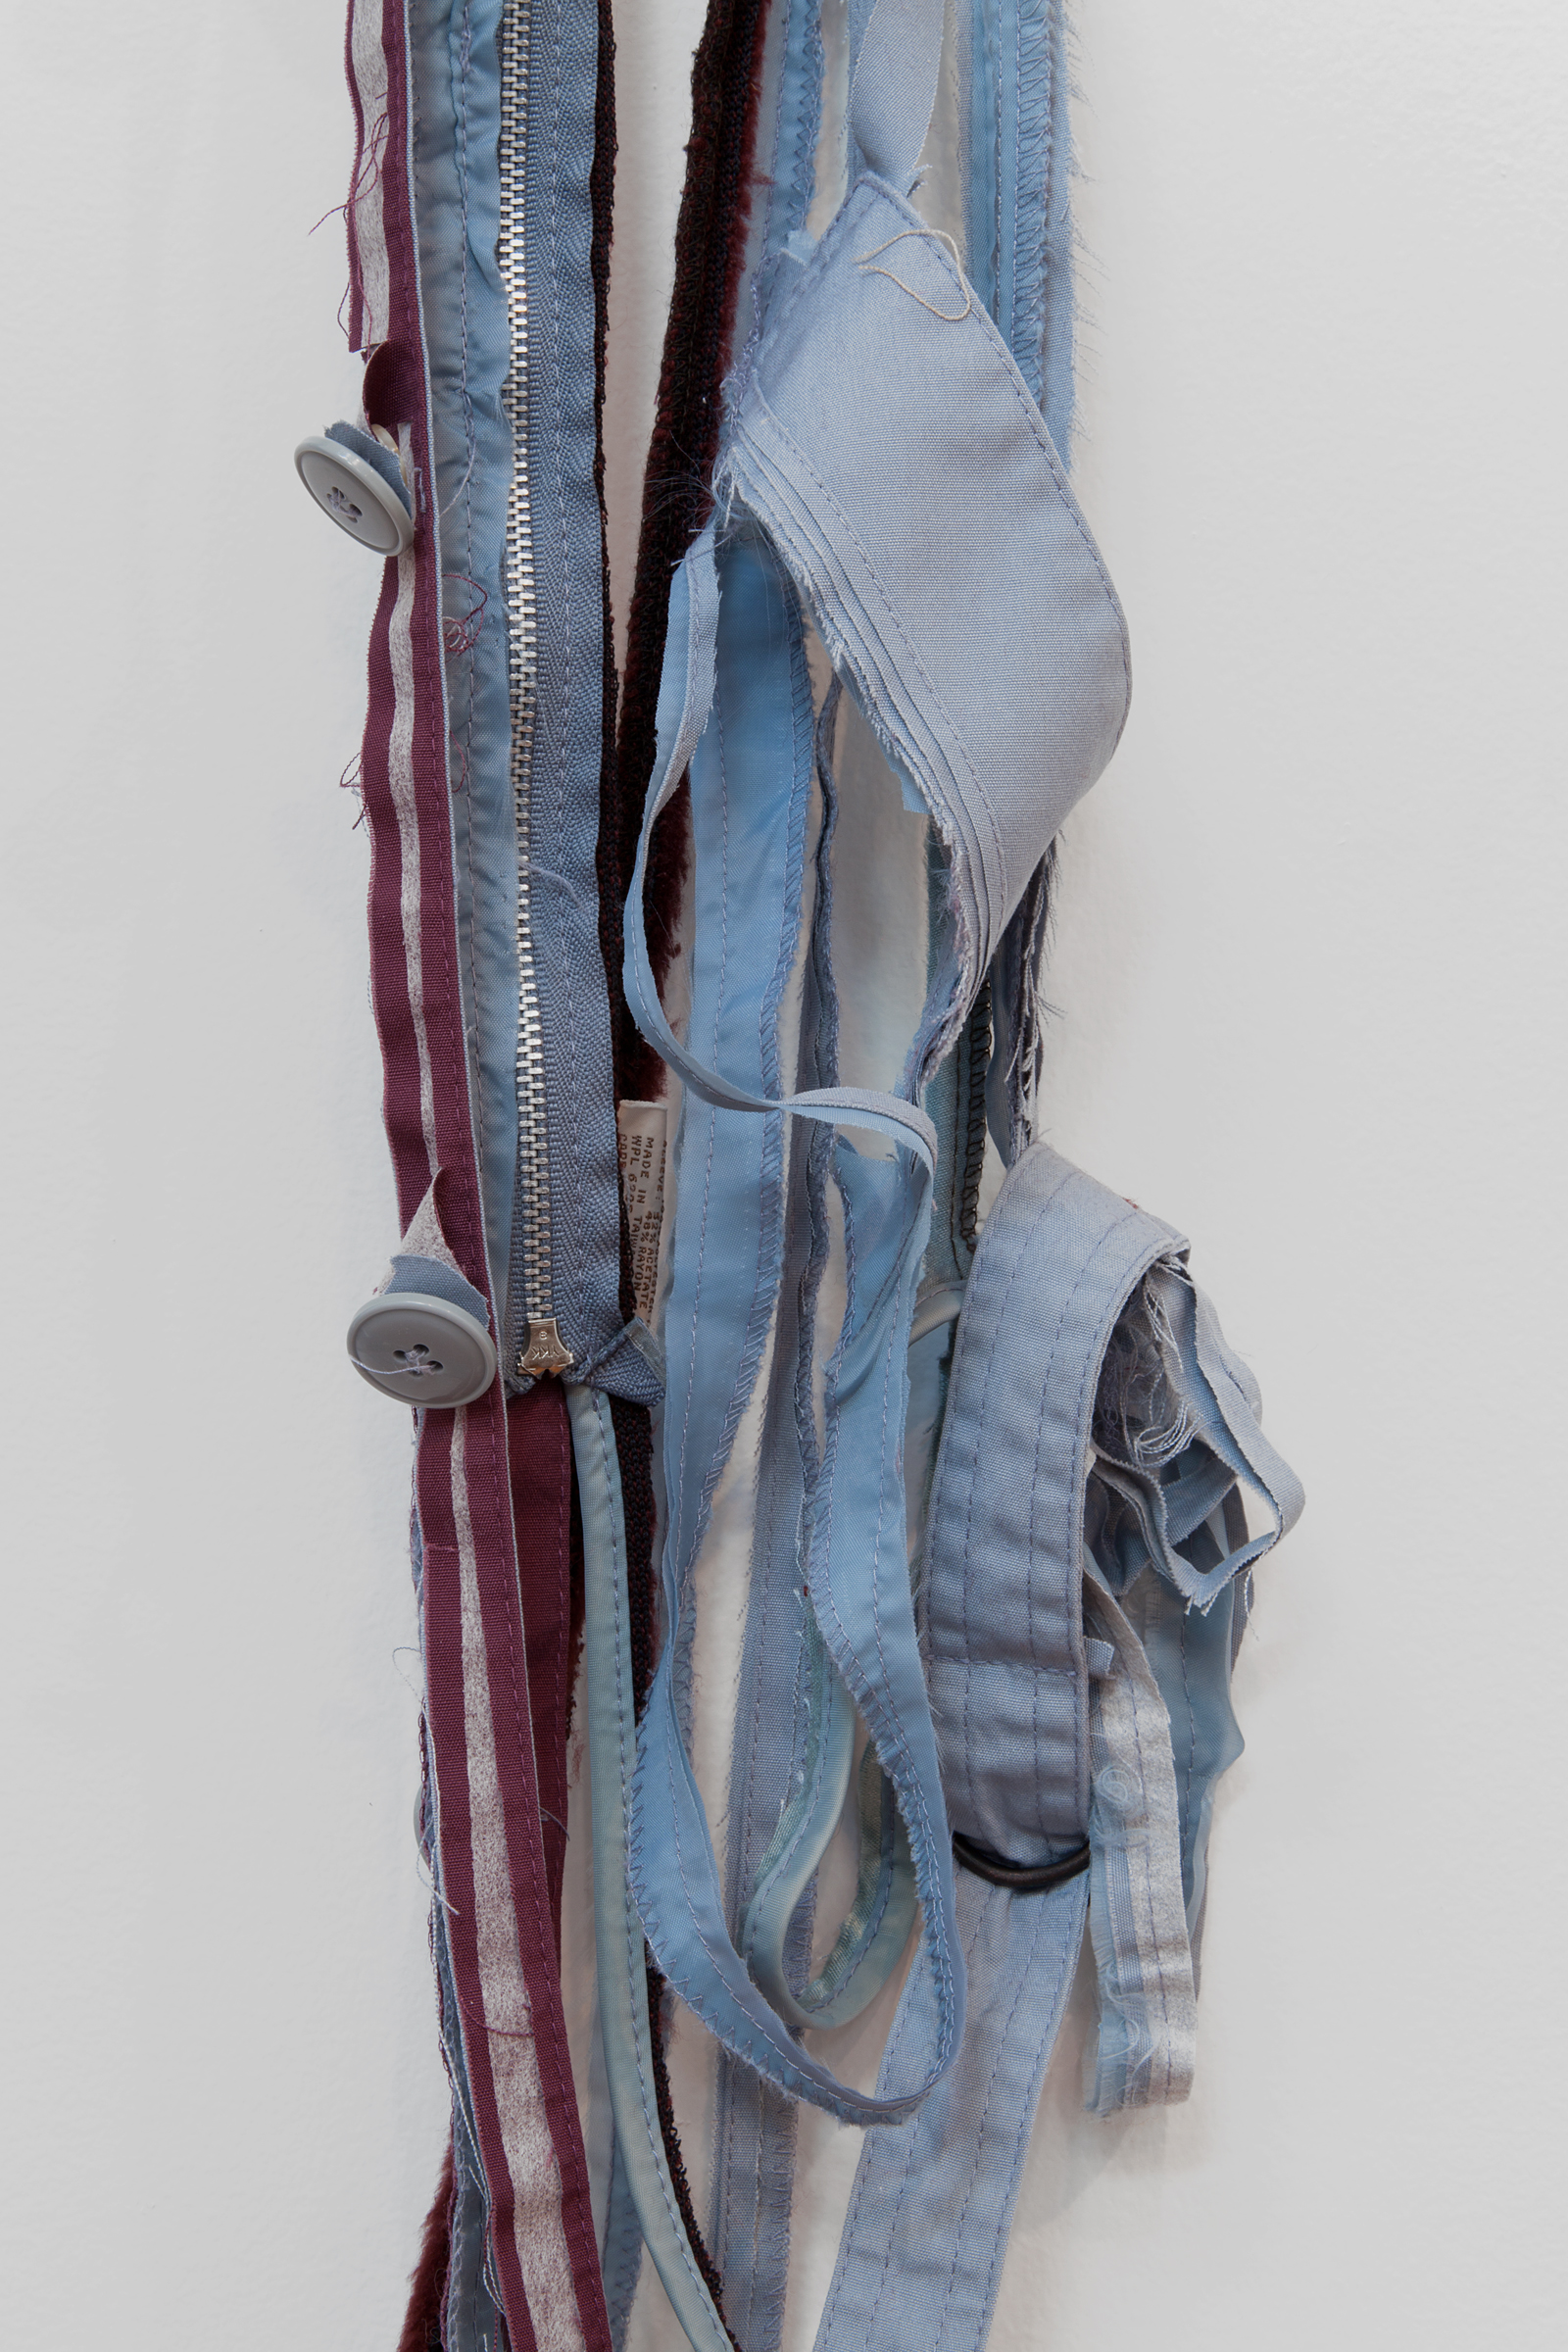   ANNA SEW HOY  (detail)  maroon/bleu lavande , fired stoneware, trench coat and resin finger hook, 58" x 18" x 4.5", 2012 